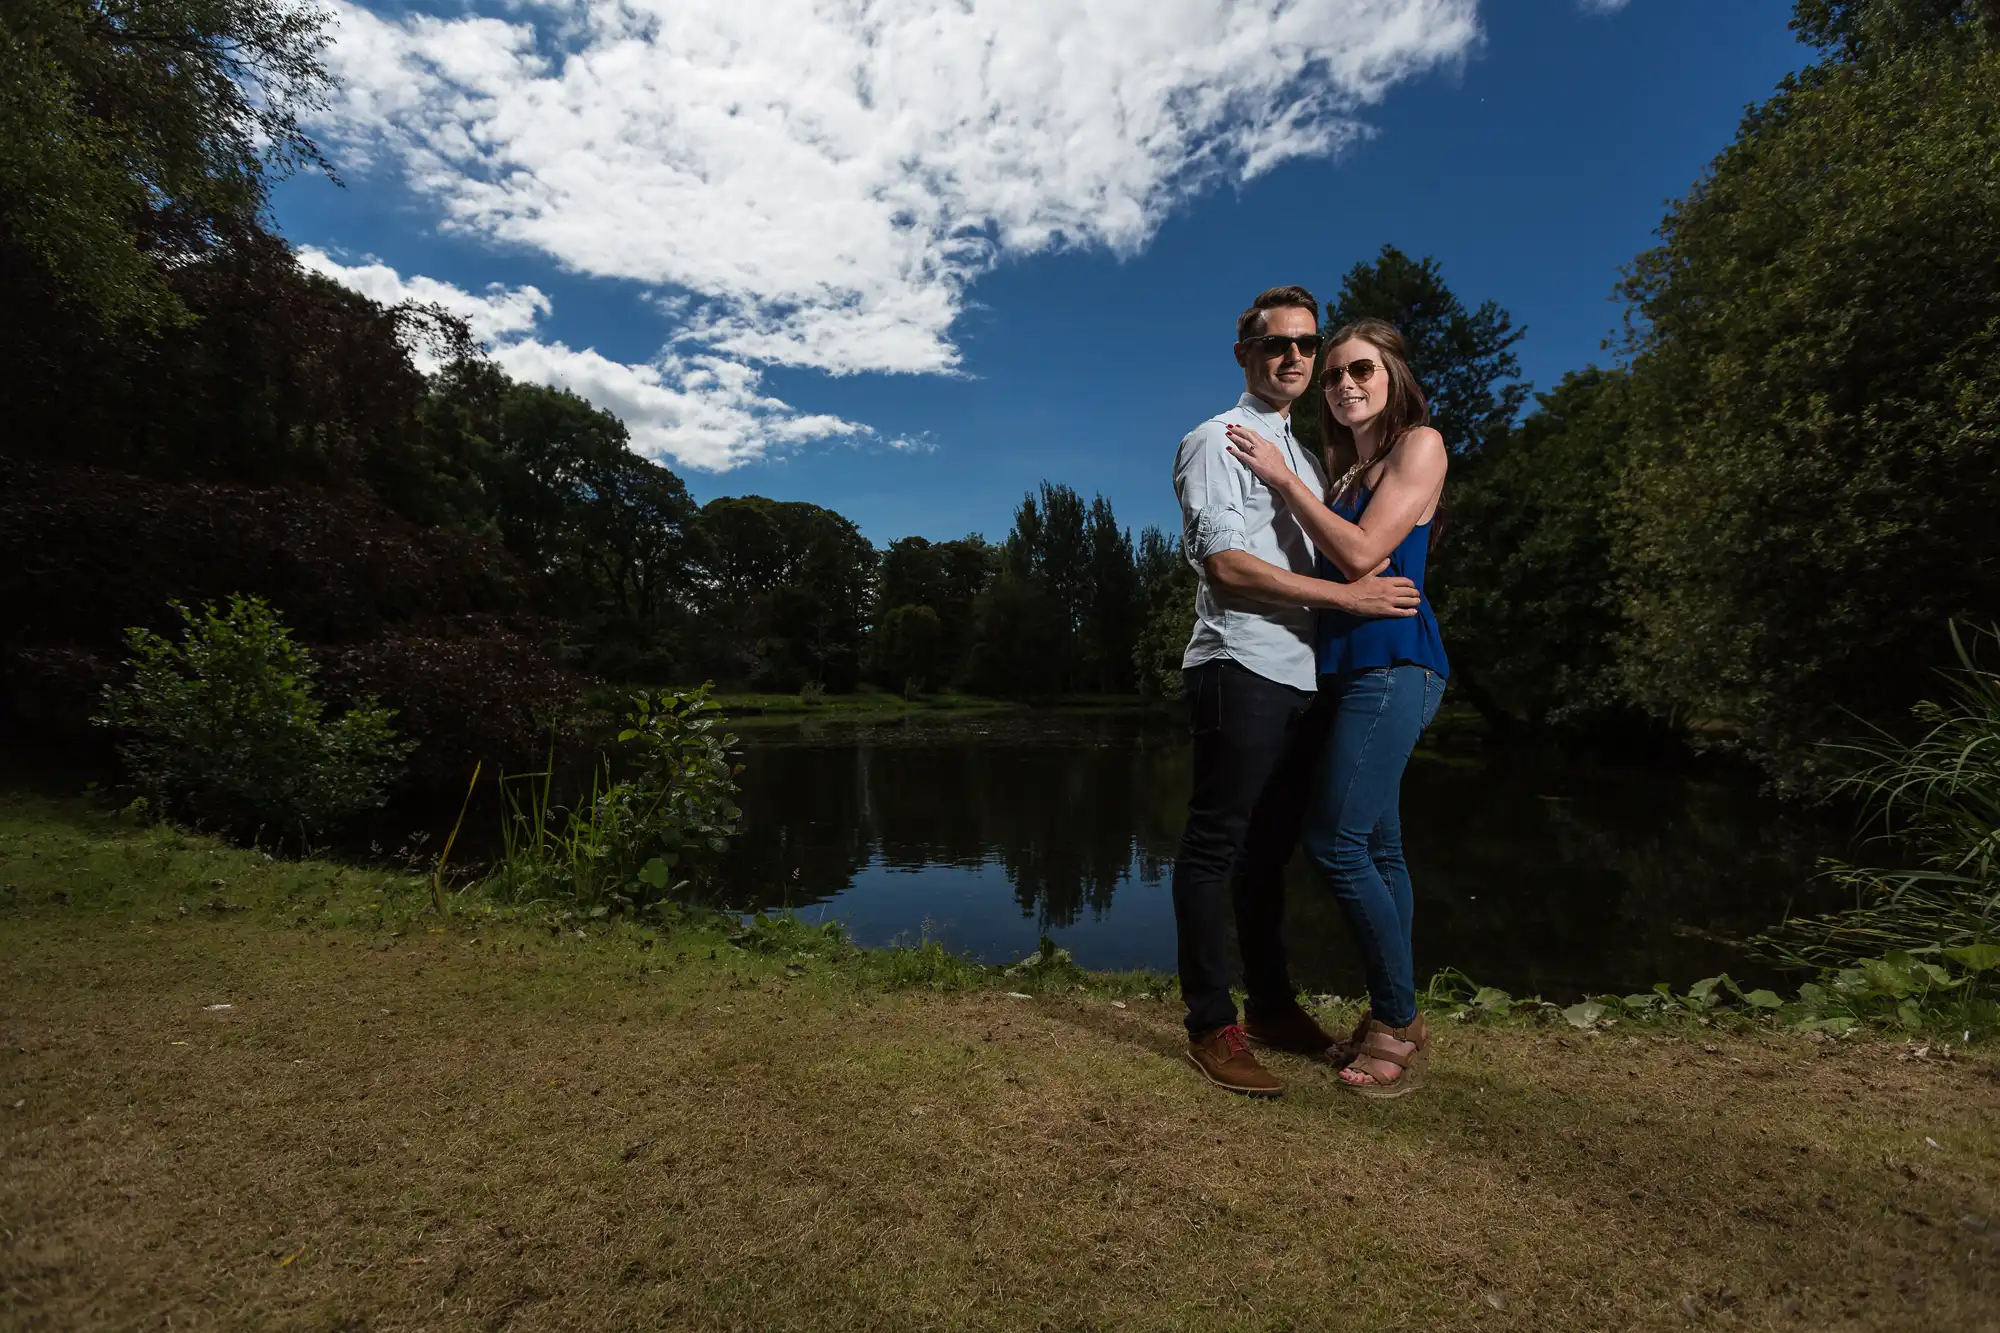 A couple embracing beside a tranquil pond under a sunny sky with fluffy clouds.